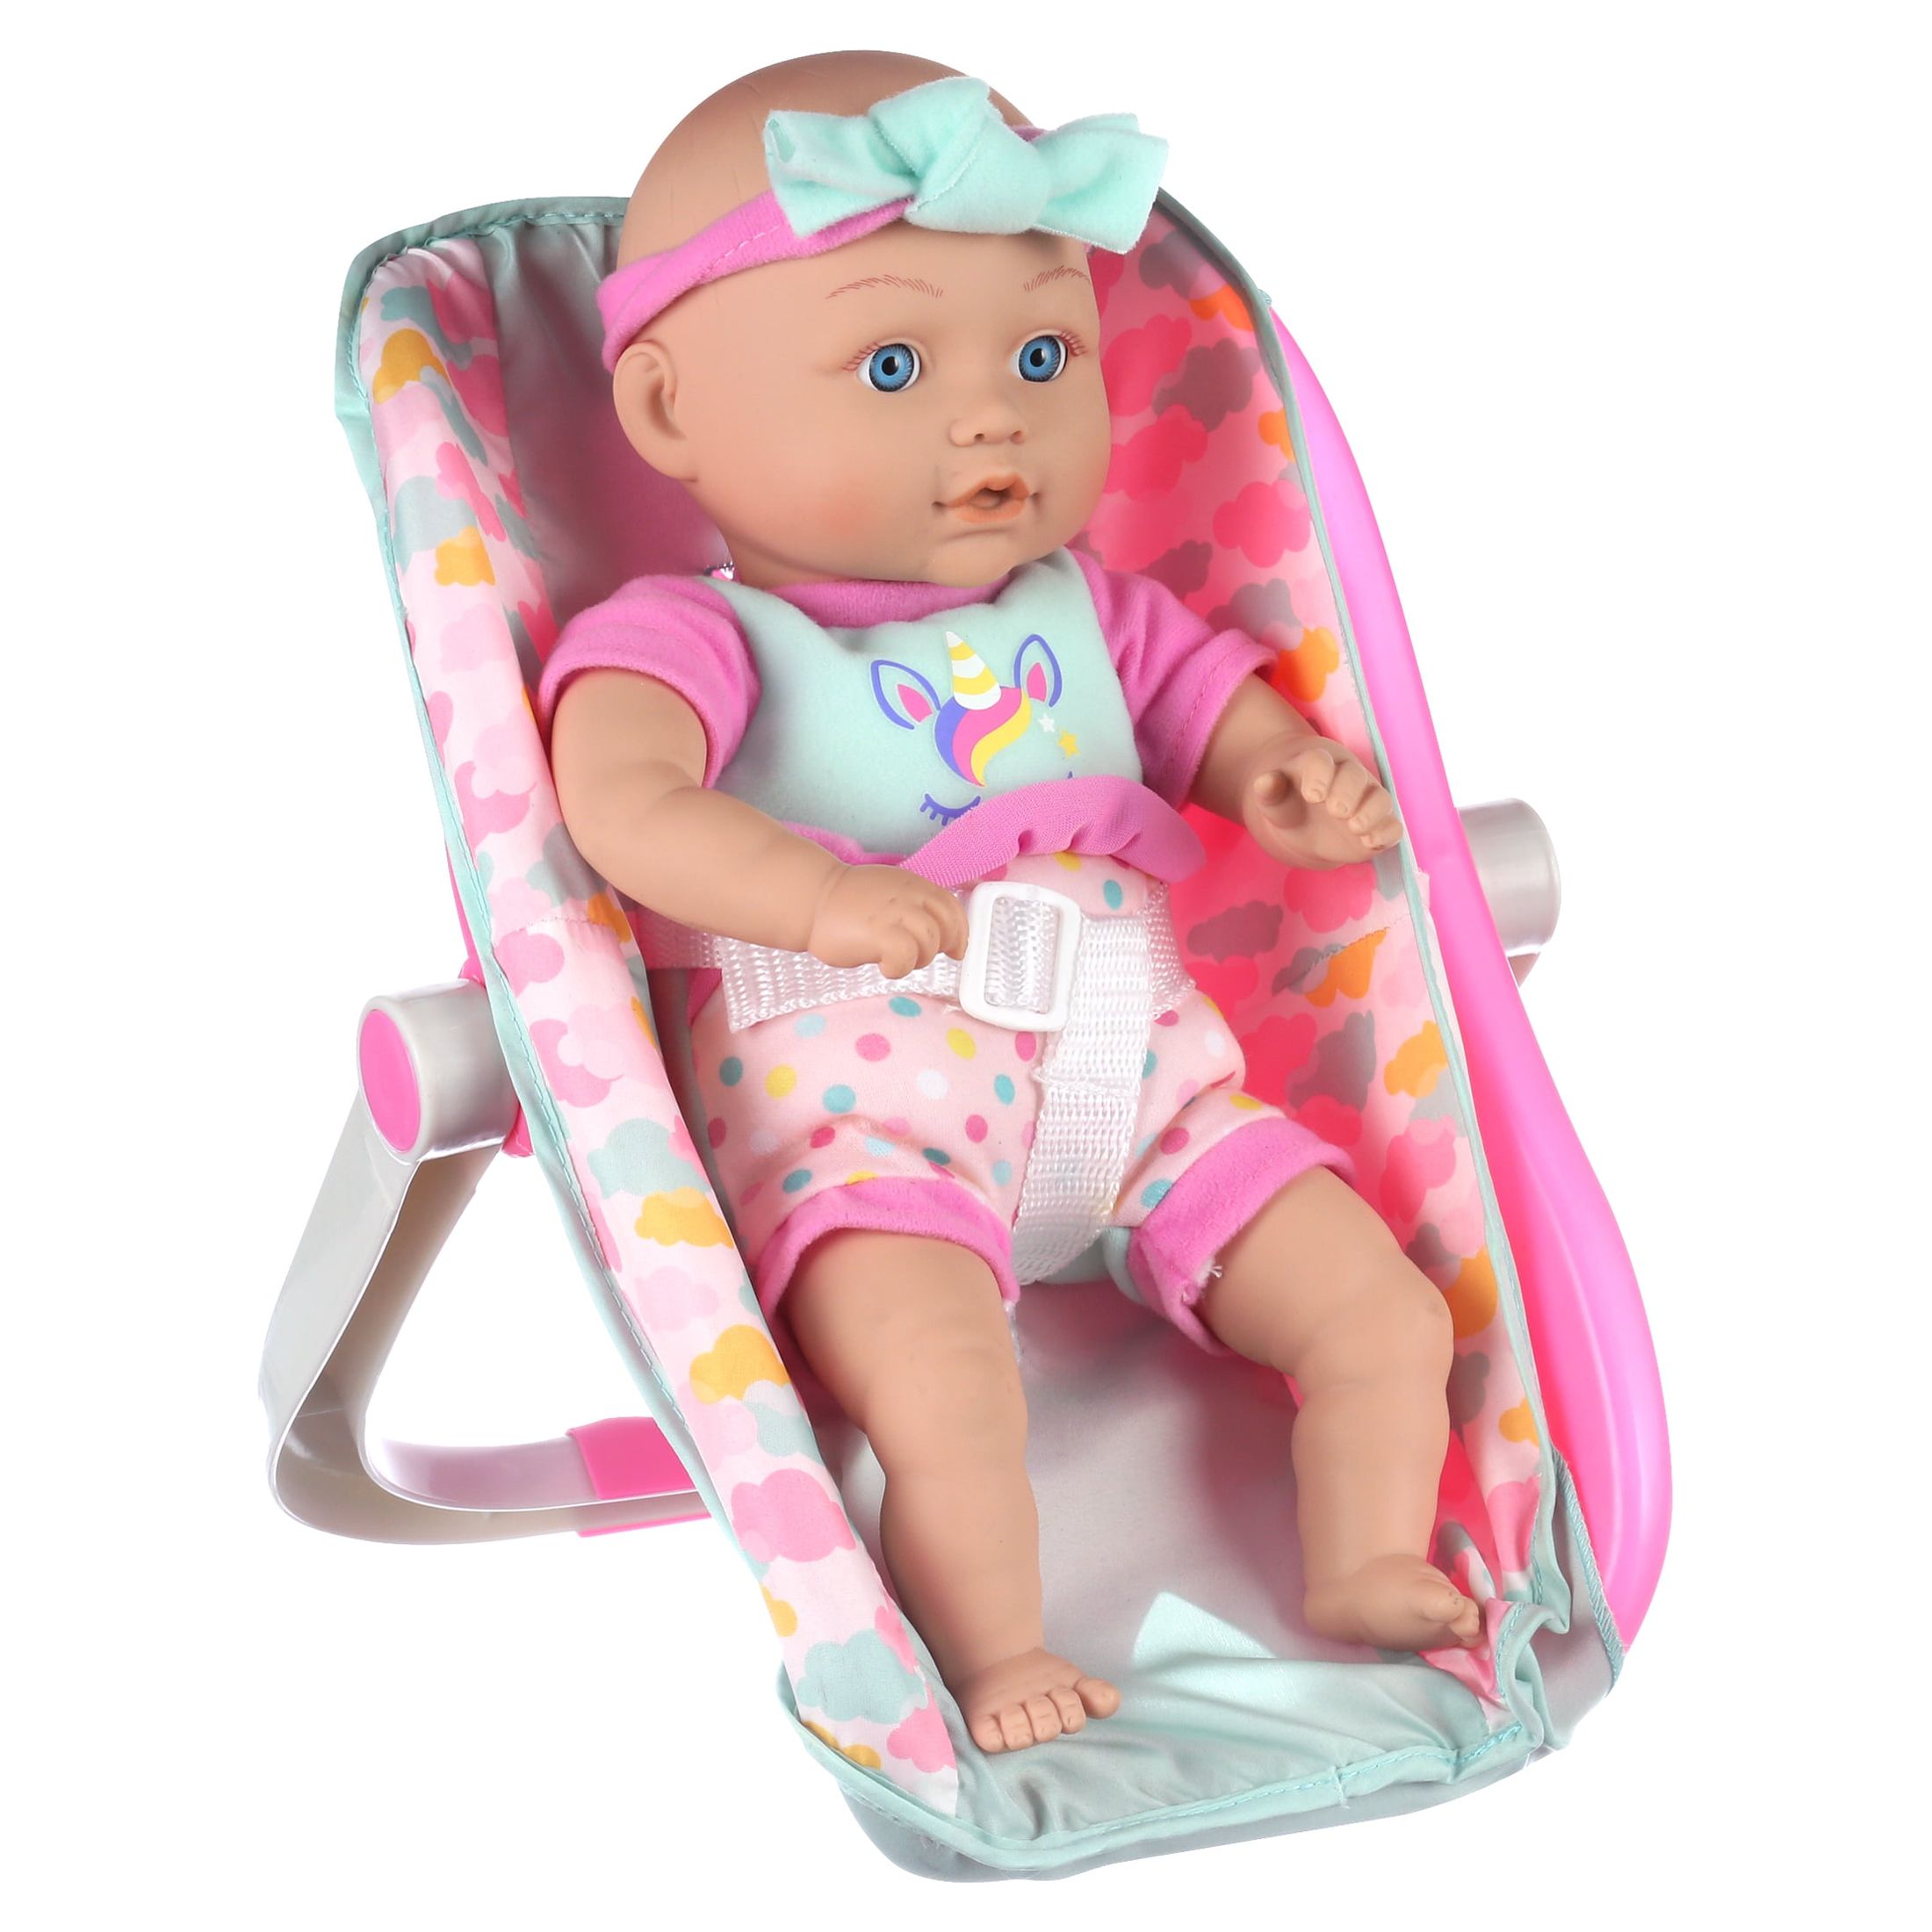 My Sweet Love 13 inch Baby Doll with Carrier and Handle Play Set, Light Skin Tone, Pink Theme - image 5 of 7